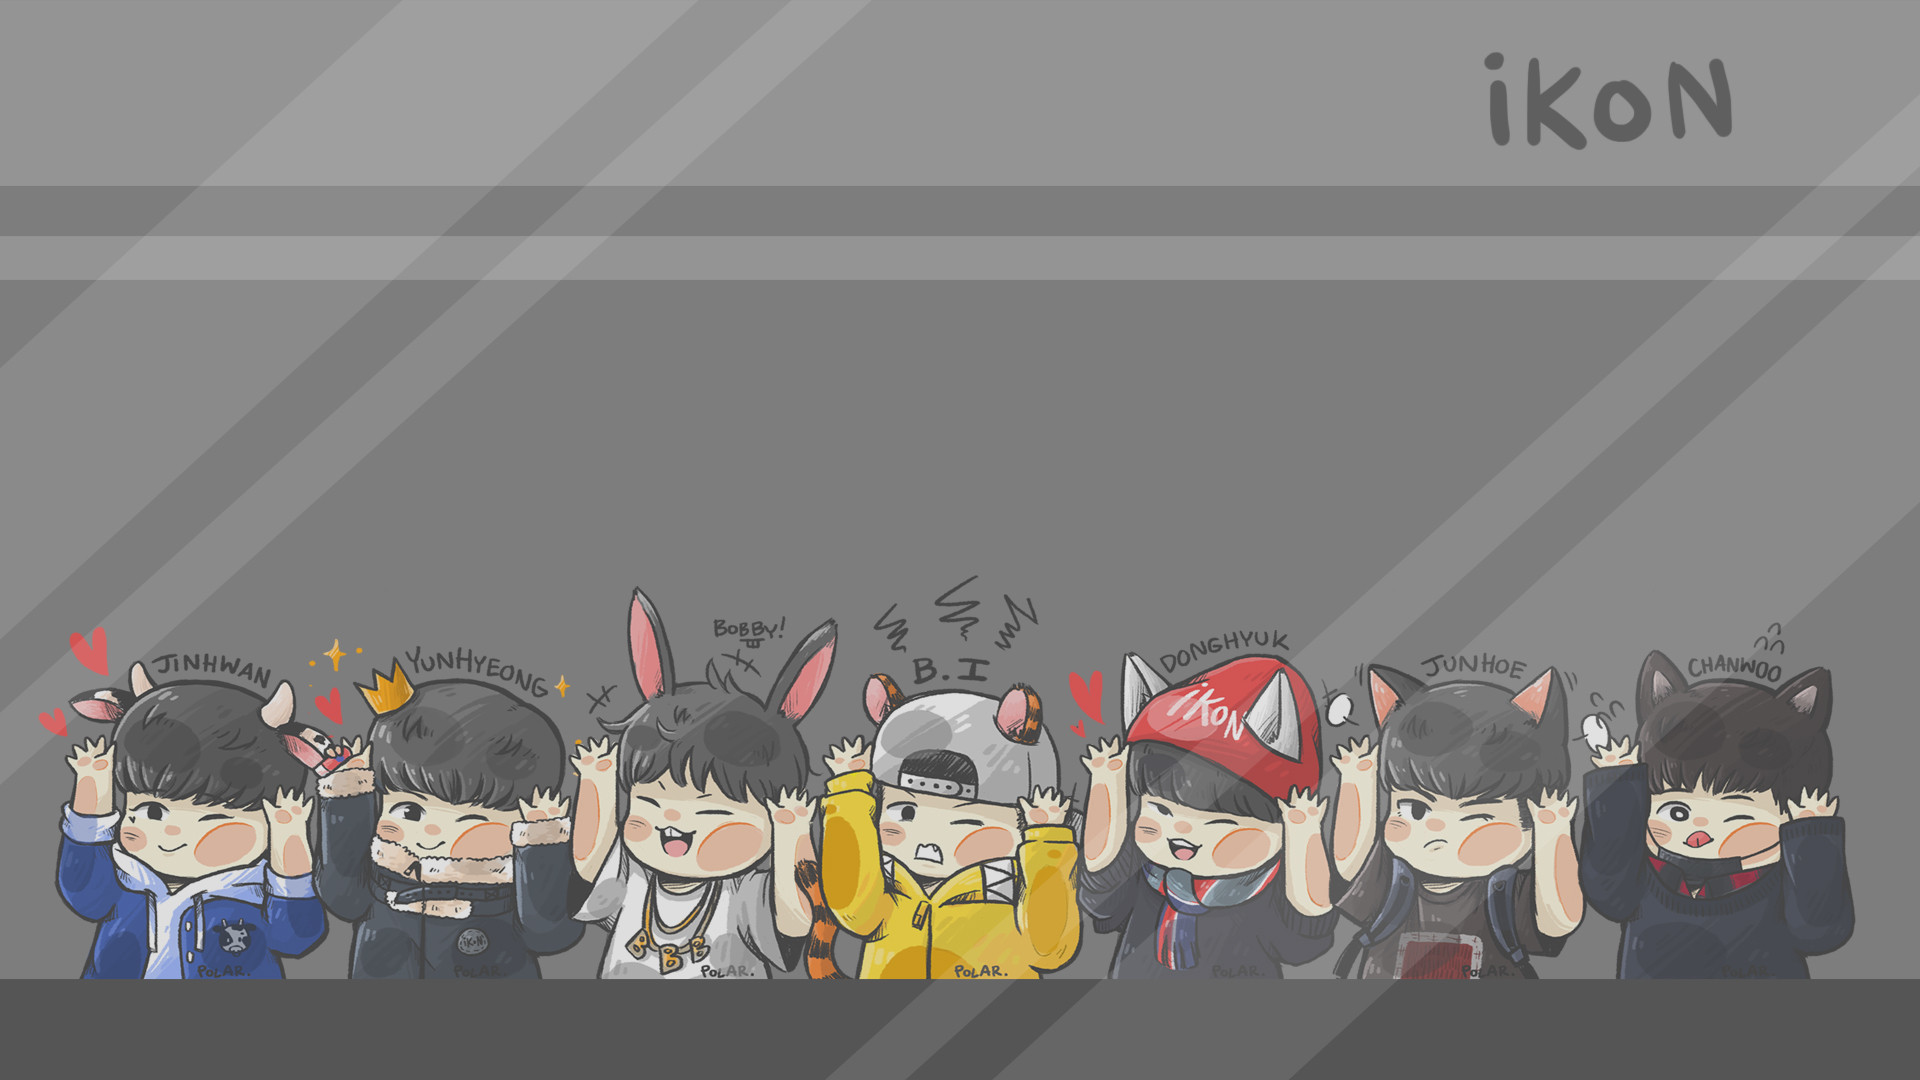 1920x1080 Don't know if this counts but I used this iKON fanart wallpaper for a while